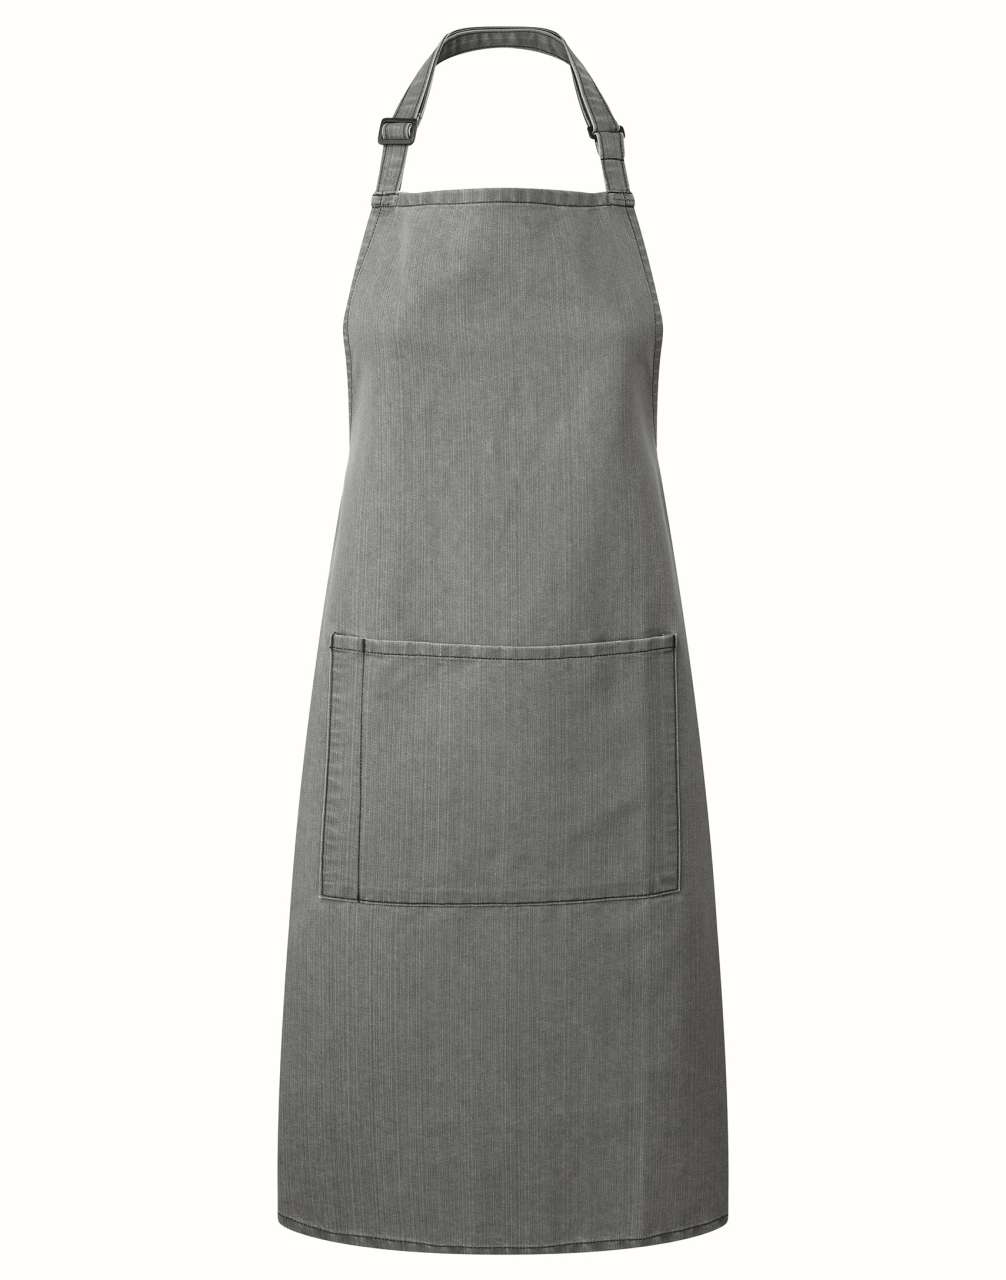 ‘COLOURS COLLECTION’ BIB APRON WITH POCKET s logom 